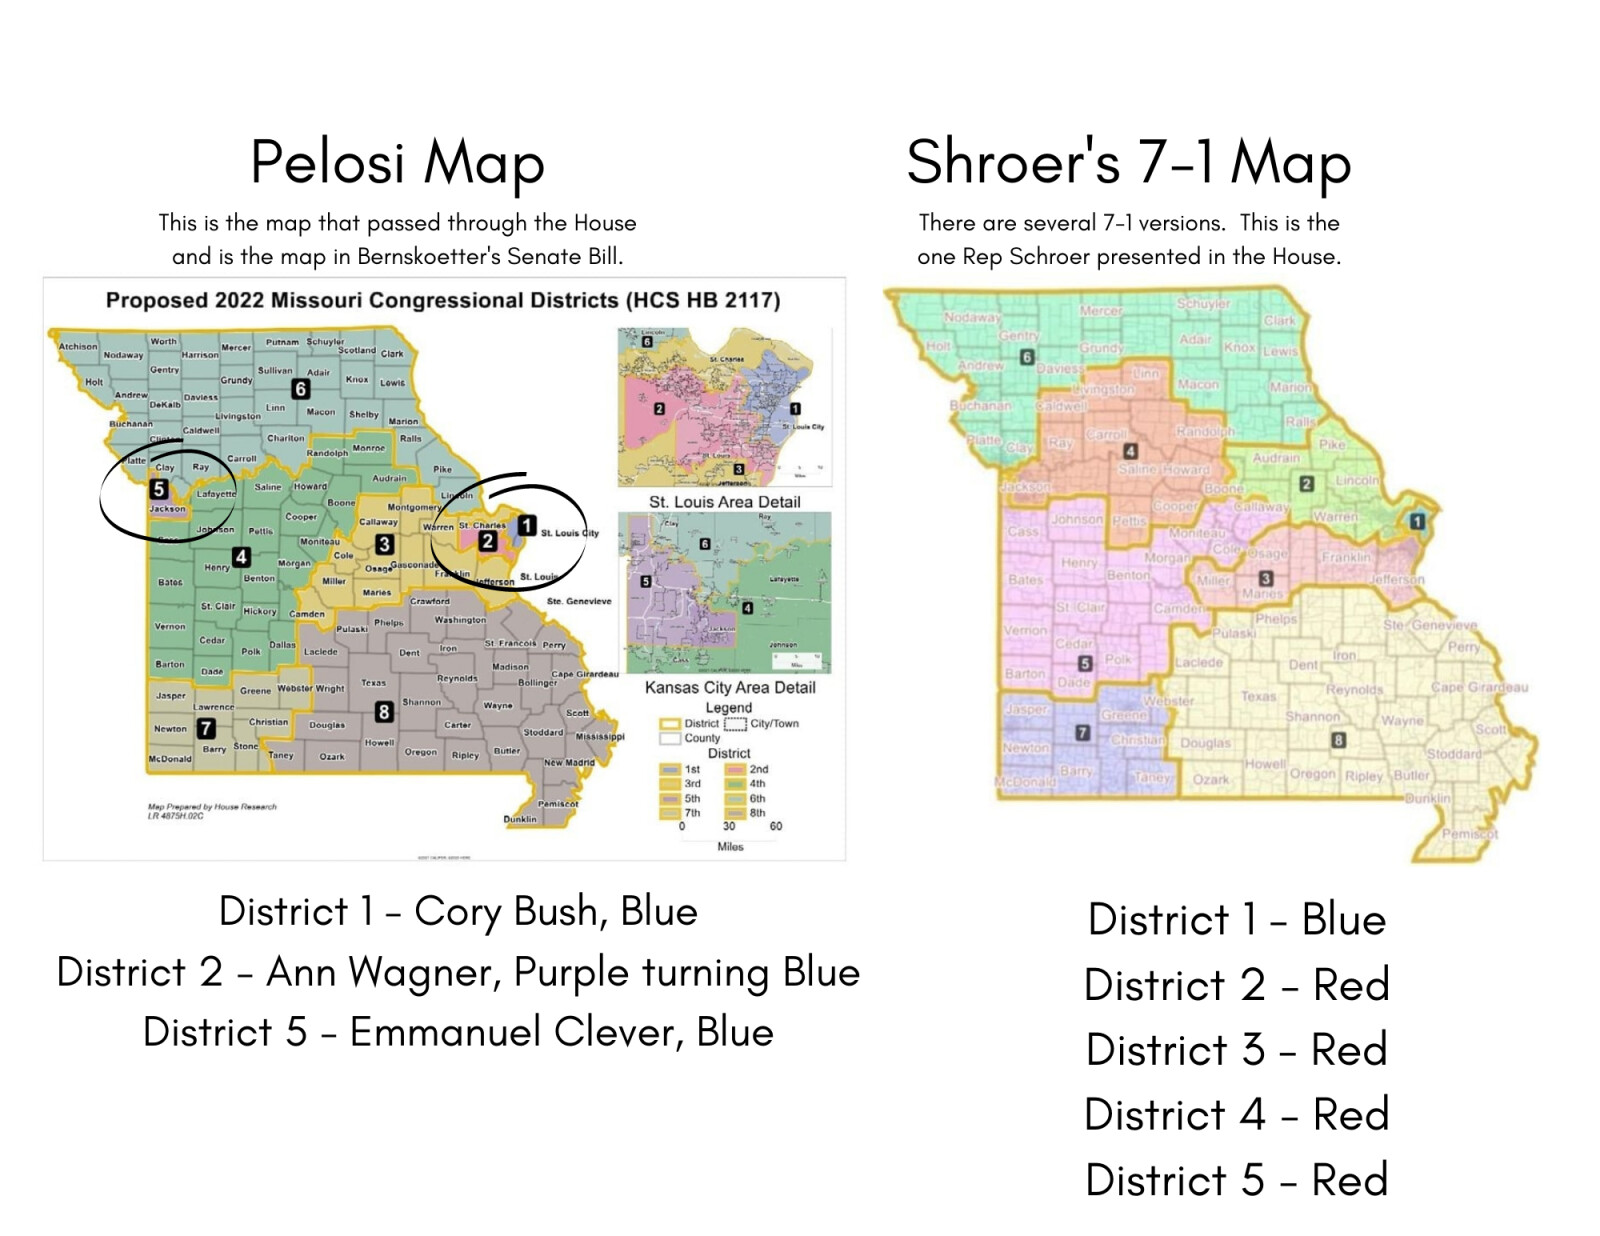 More on The Pelosi Map